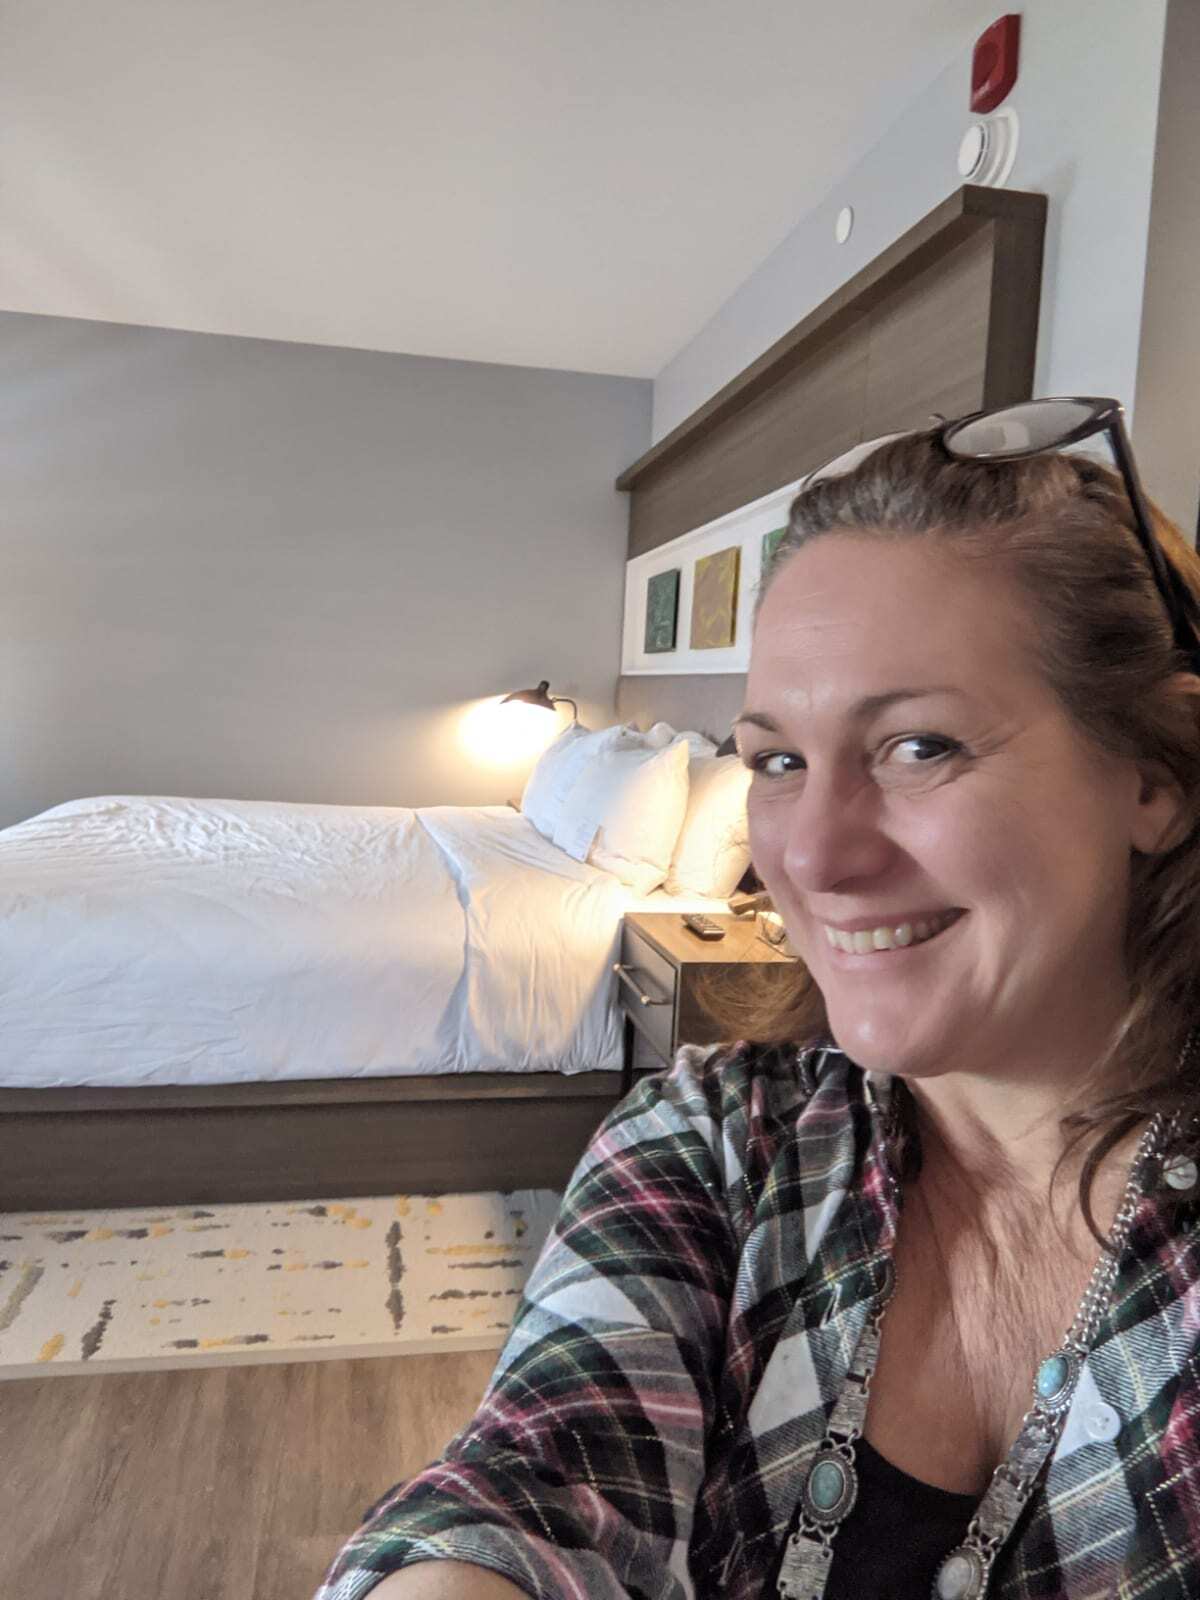 Selfie of Kathy Brown inside the Chattanooga Hotel Indigo. King size bed in background